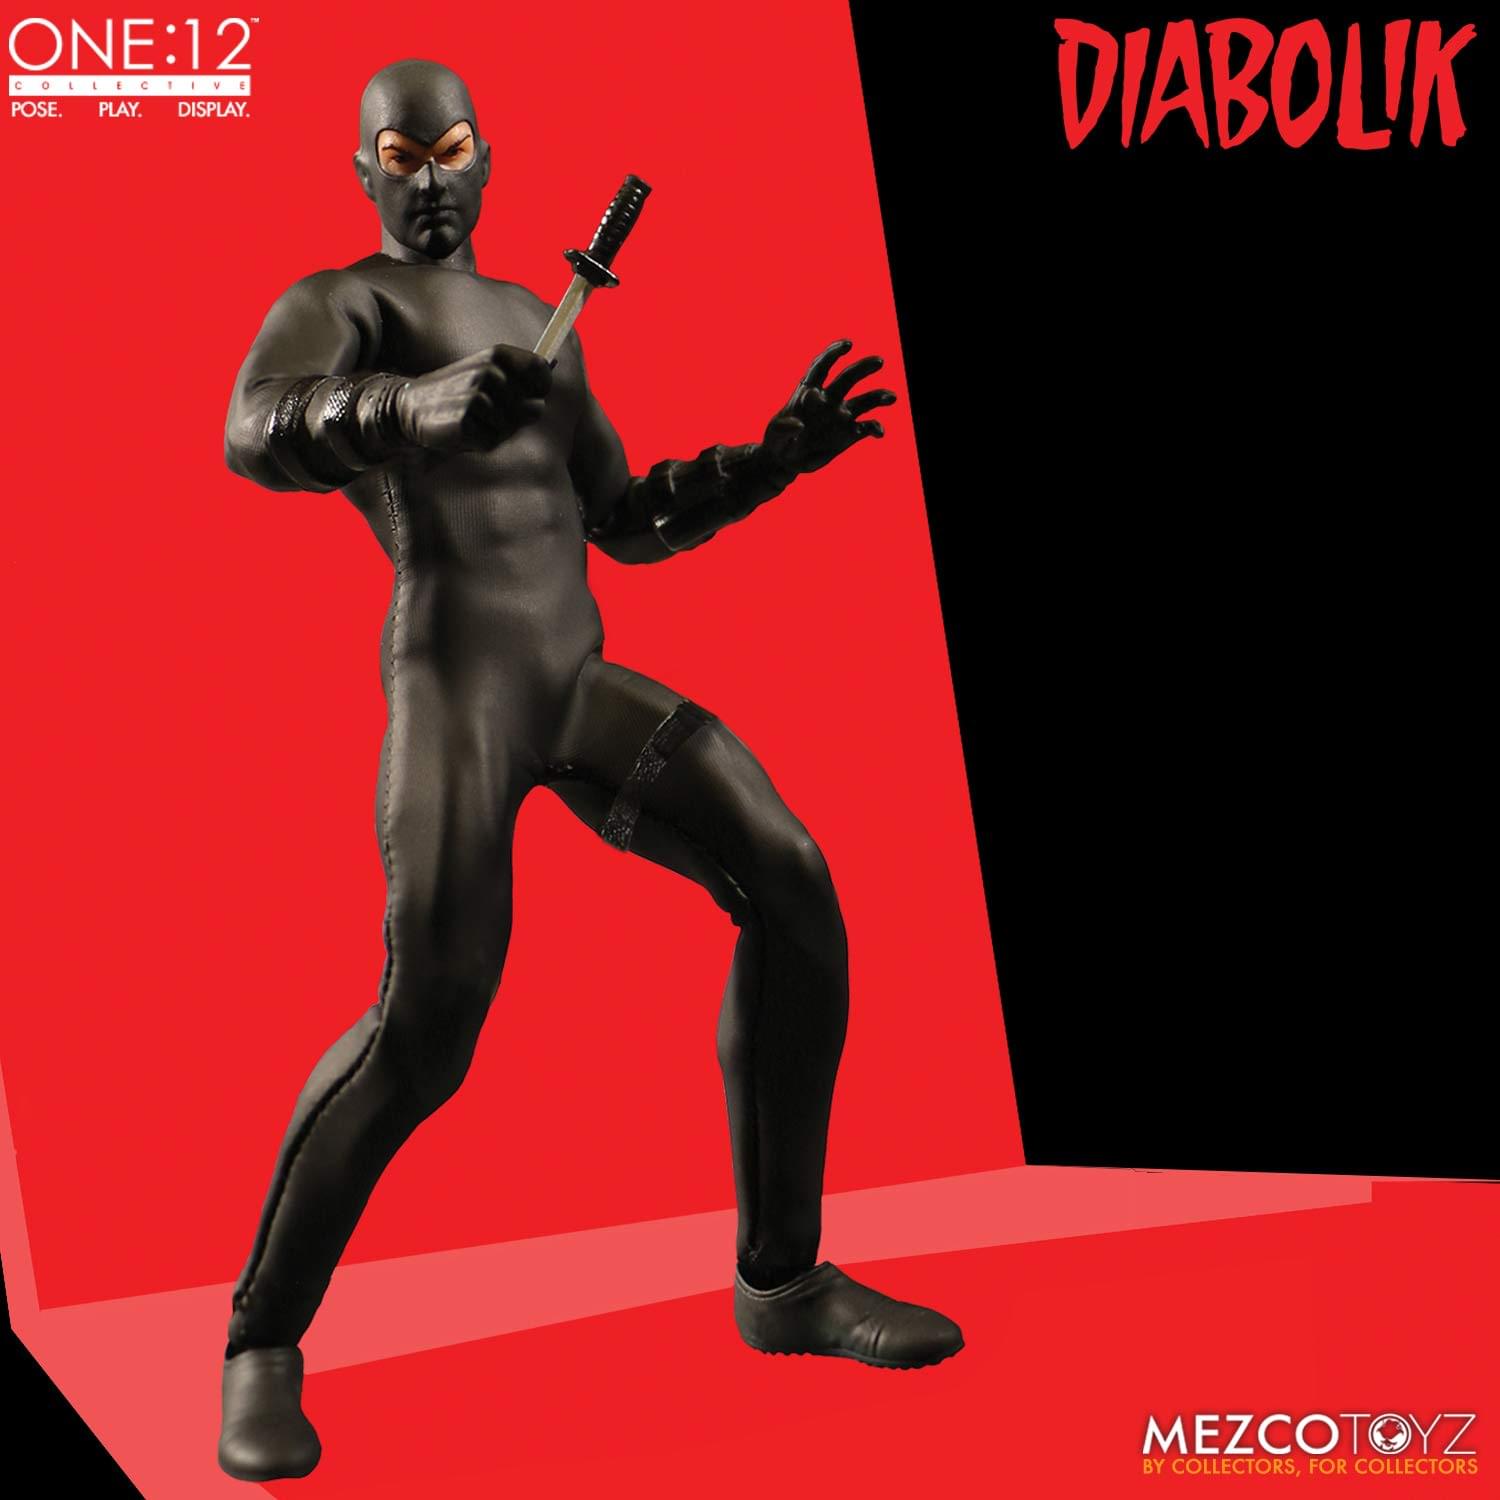 One 12 Collective 6 Inch Action Figure - Diabolik